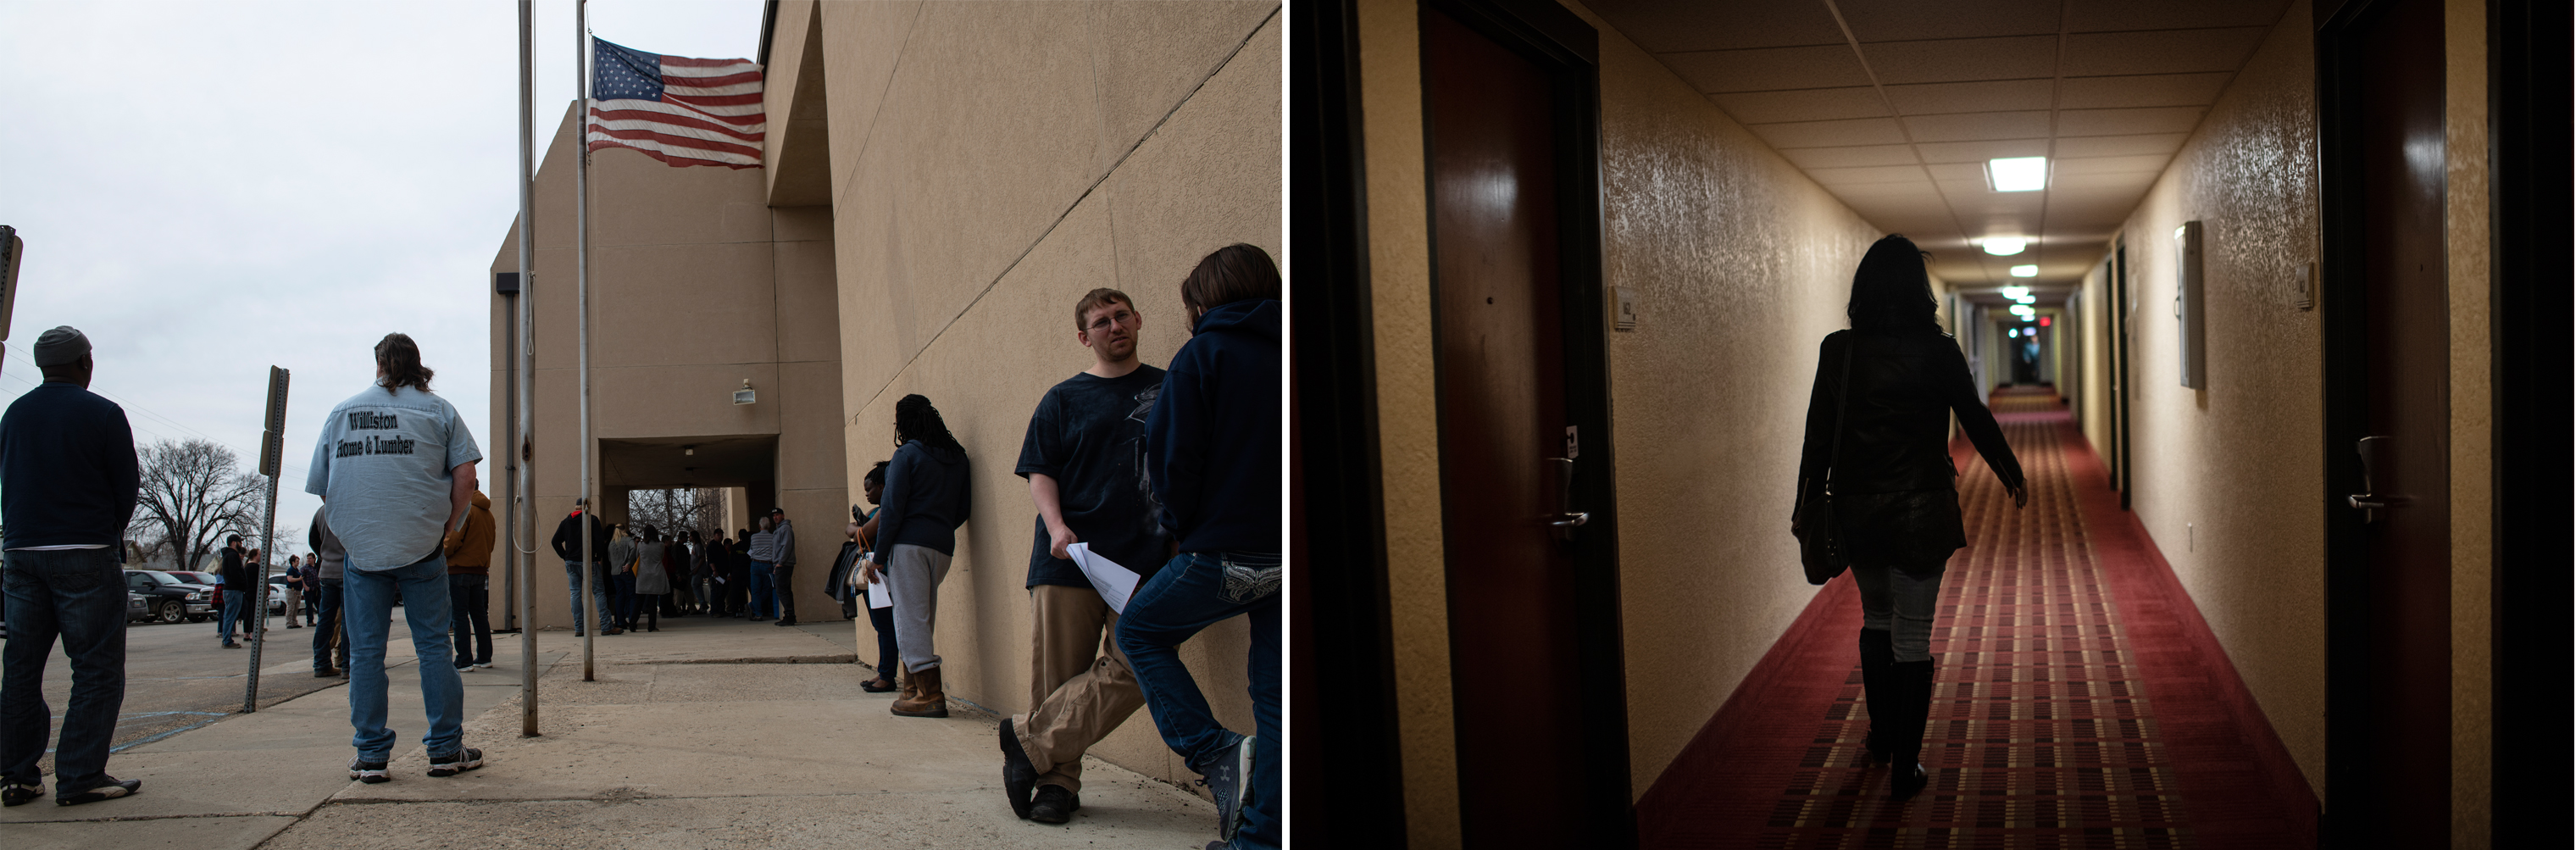 Left: People wait for the doors to open for at a job fair in Williston, North Dakota, April 23, 2018.; Right: Lazenko tours hotels that were at the heart of the trafficking industry during the oil boom, April 24, 2018. (Lynsey Addario for TIME)